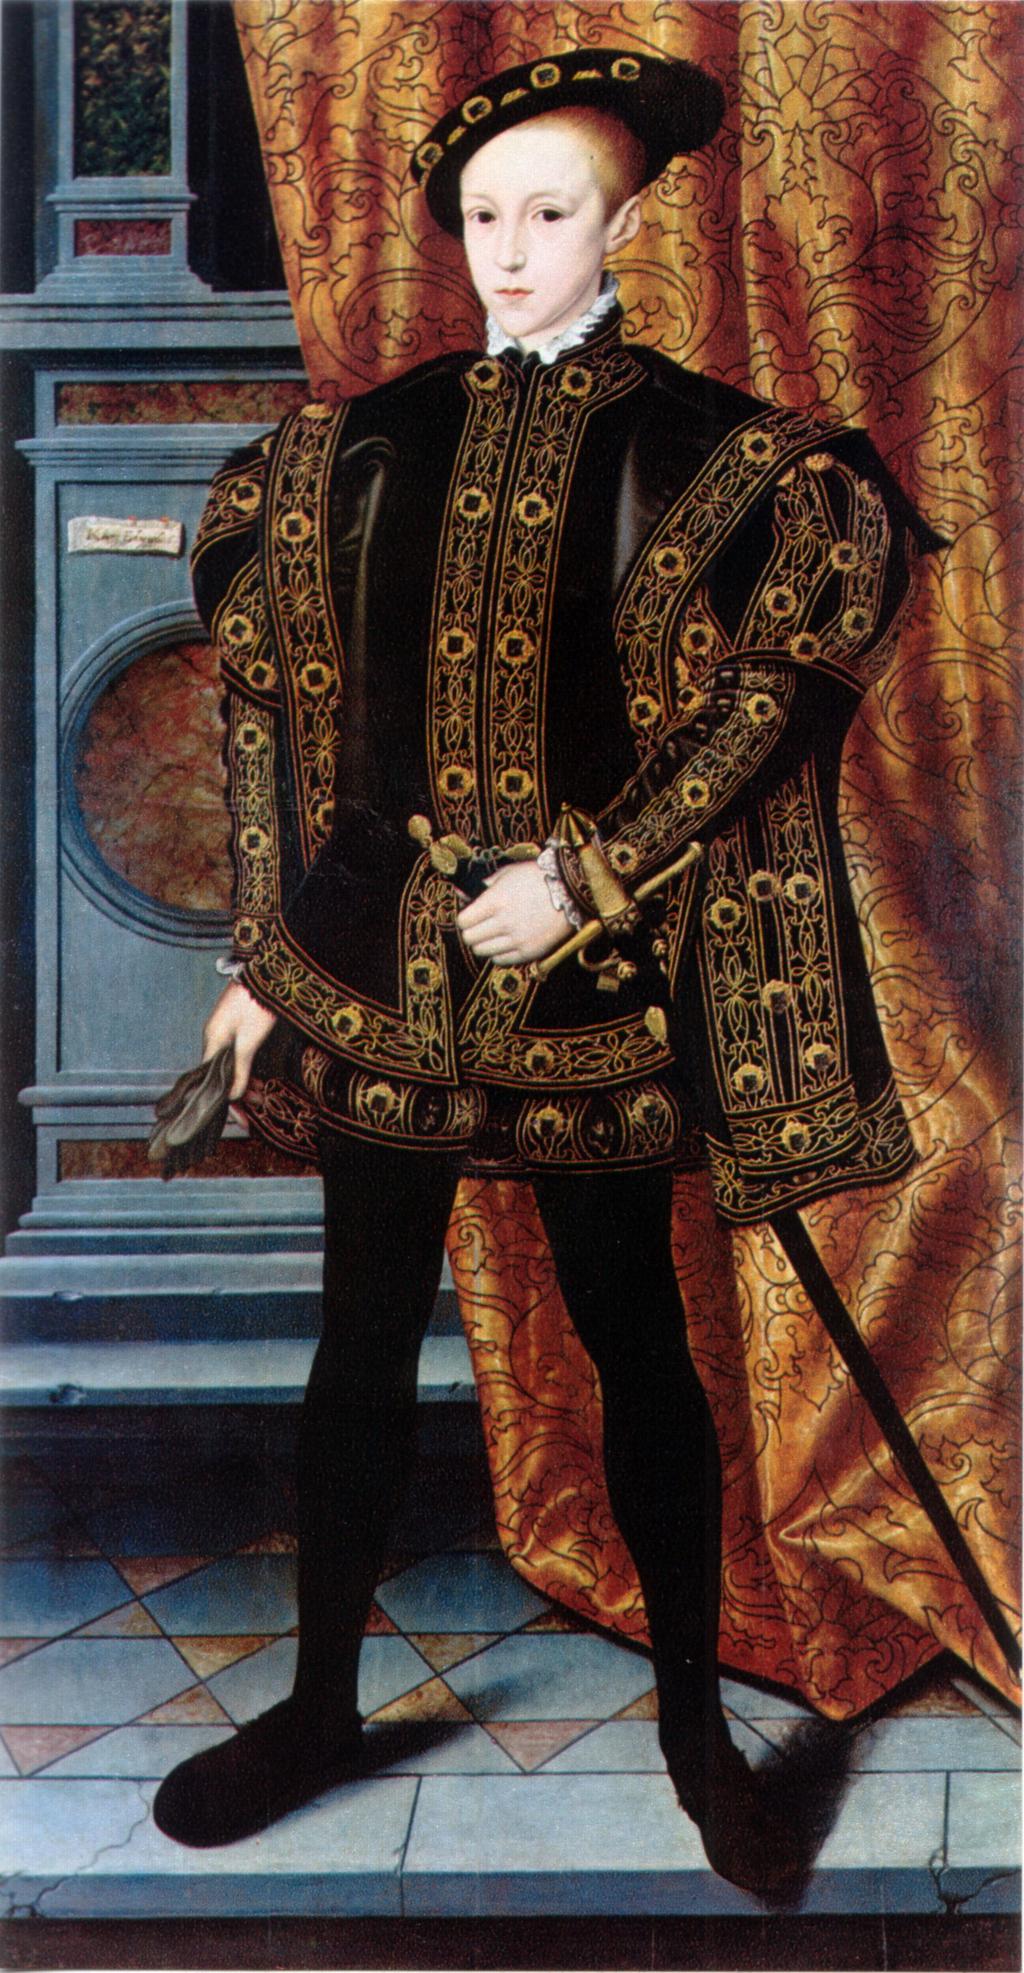 King Edward VI of England, after an original by William Scrots, c.1550. This image shows the style of fashion after the death of Henry and his fashion influence.